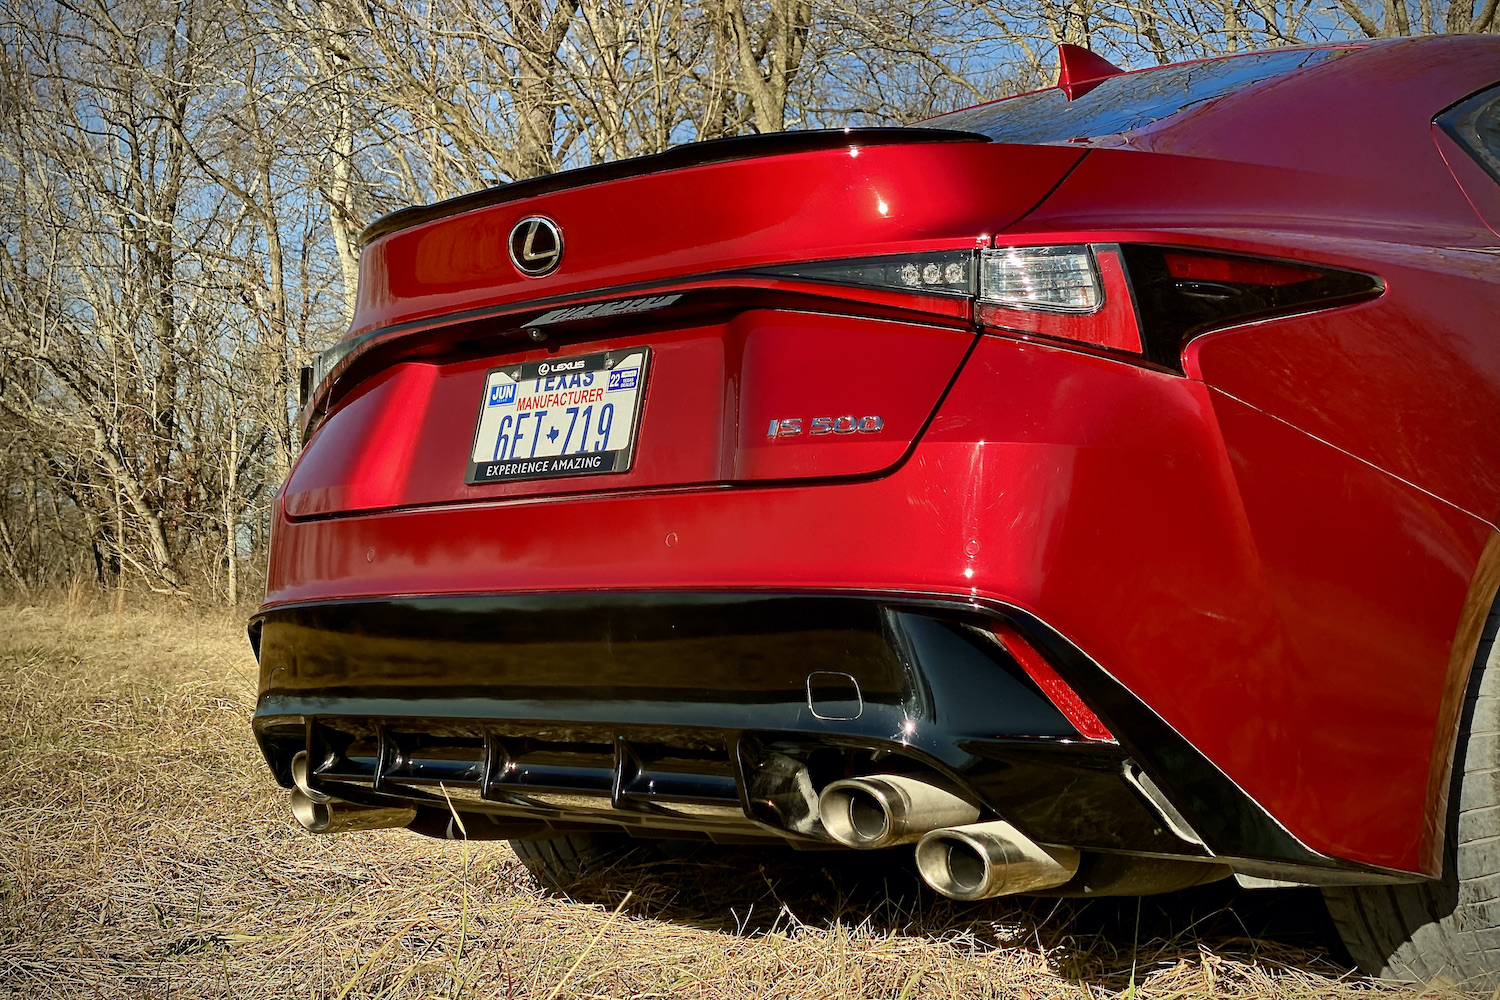 Lexus IS 500 rear end from passenger's side close up in a grassy field.